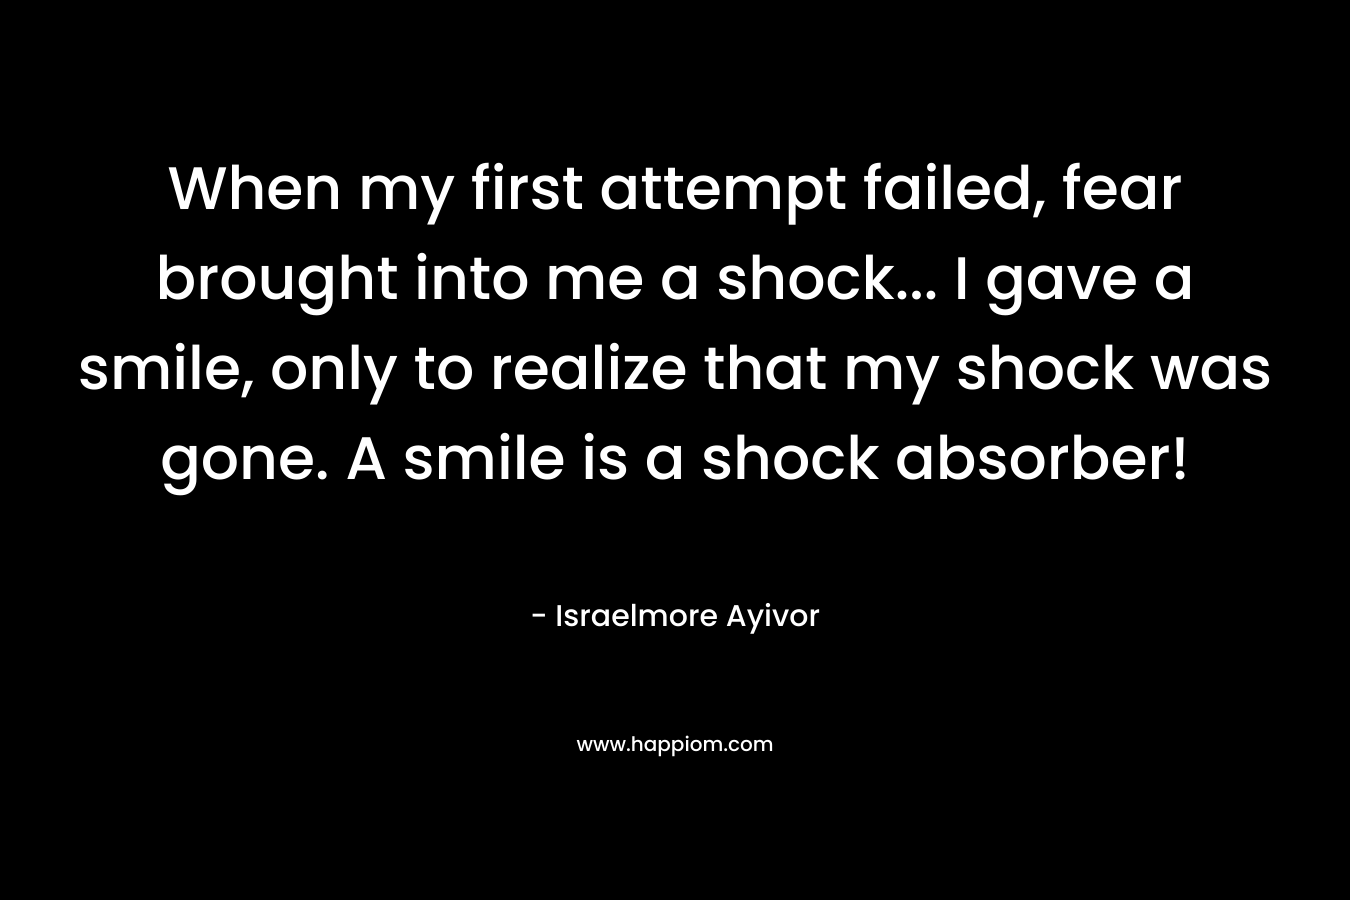 When my first attempt failed, fear brought into me a shock... I gave a smile, only to realize that my shock was gone. A smile is a shock absorber!